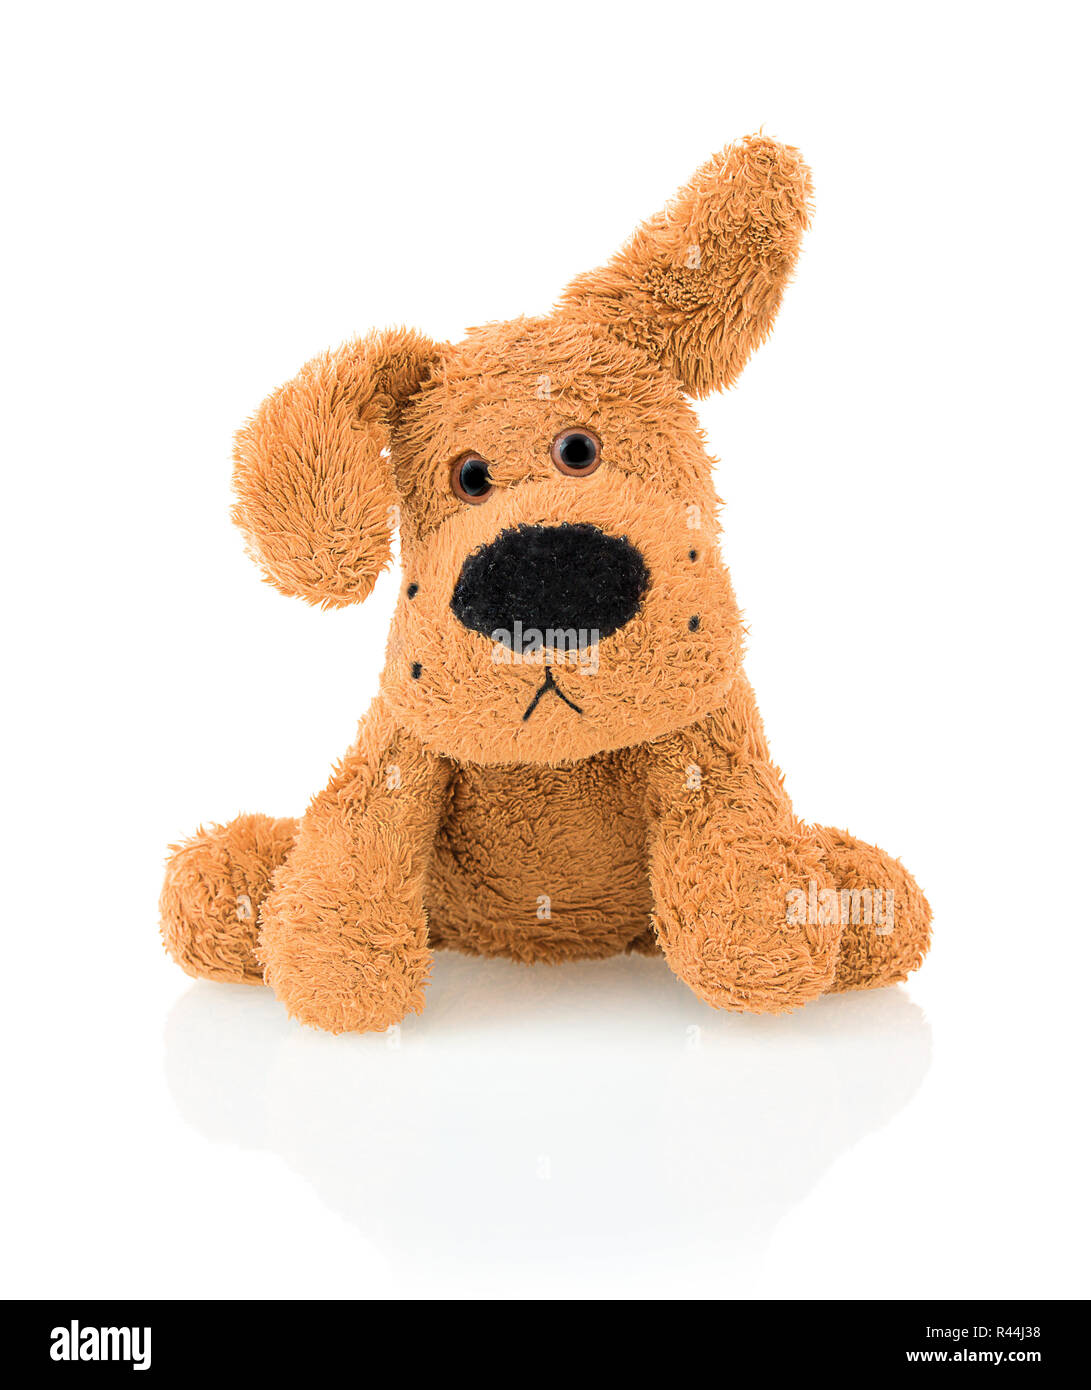 Cute dog doll isolated on white background with shadow reflection. Playful bright brown dog sitting on white underlay. Stock Photo